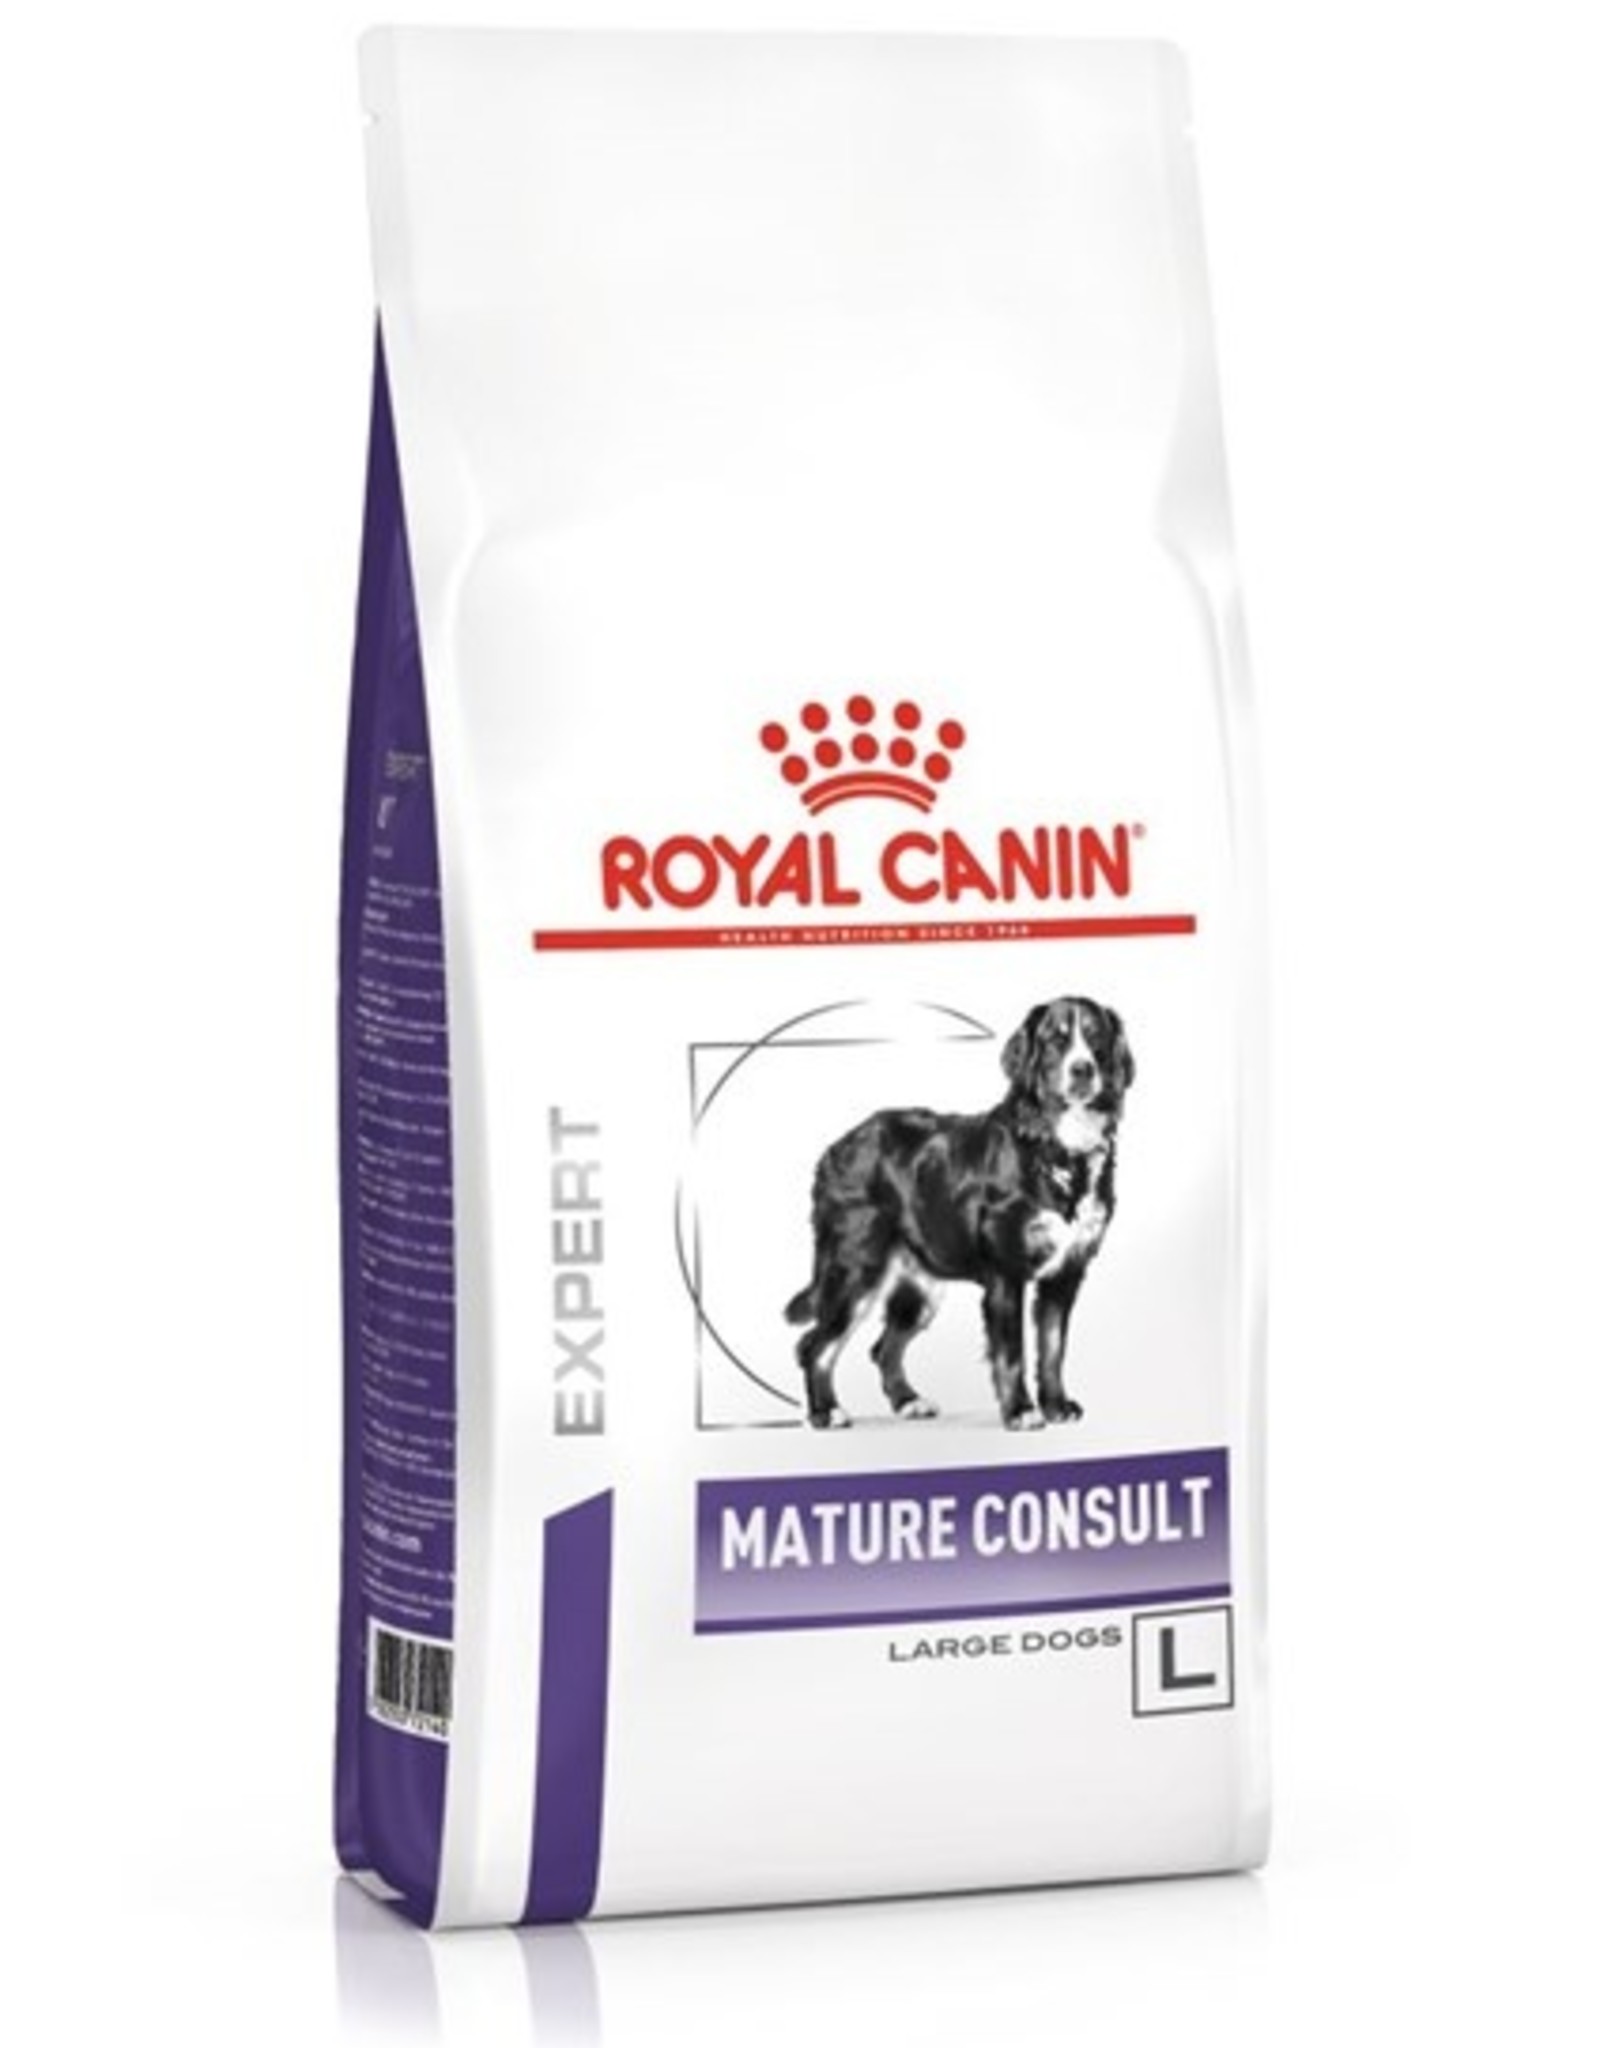 Royal Canin Royal Canin Mature Consult Large Breed Hond 14kg